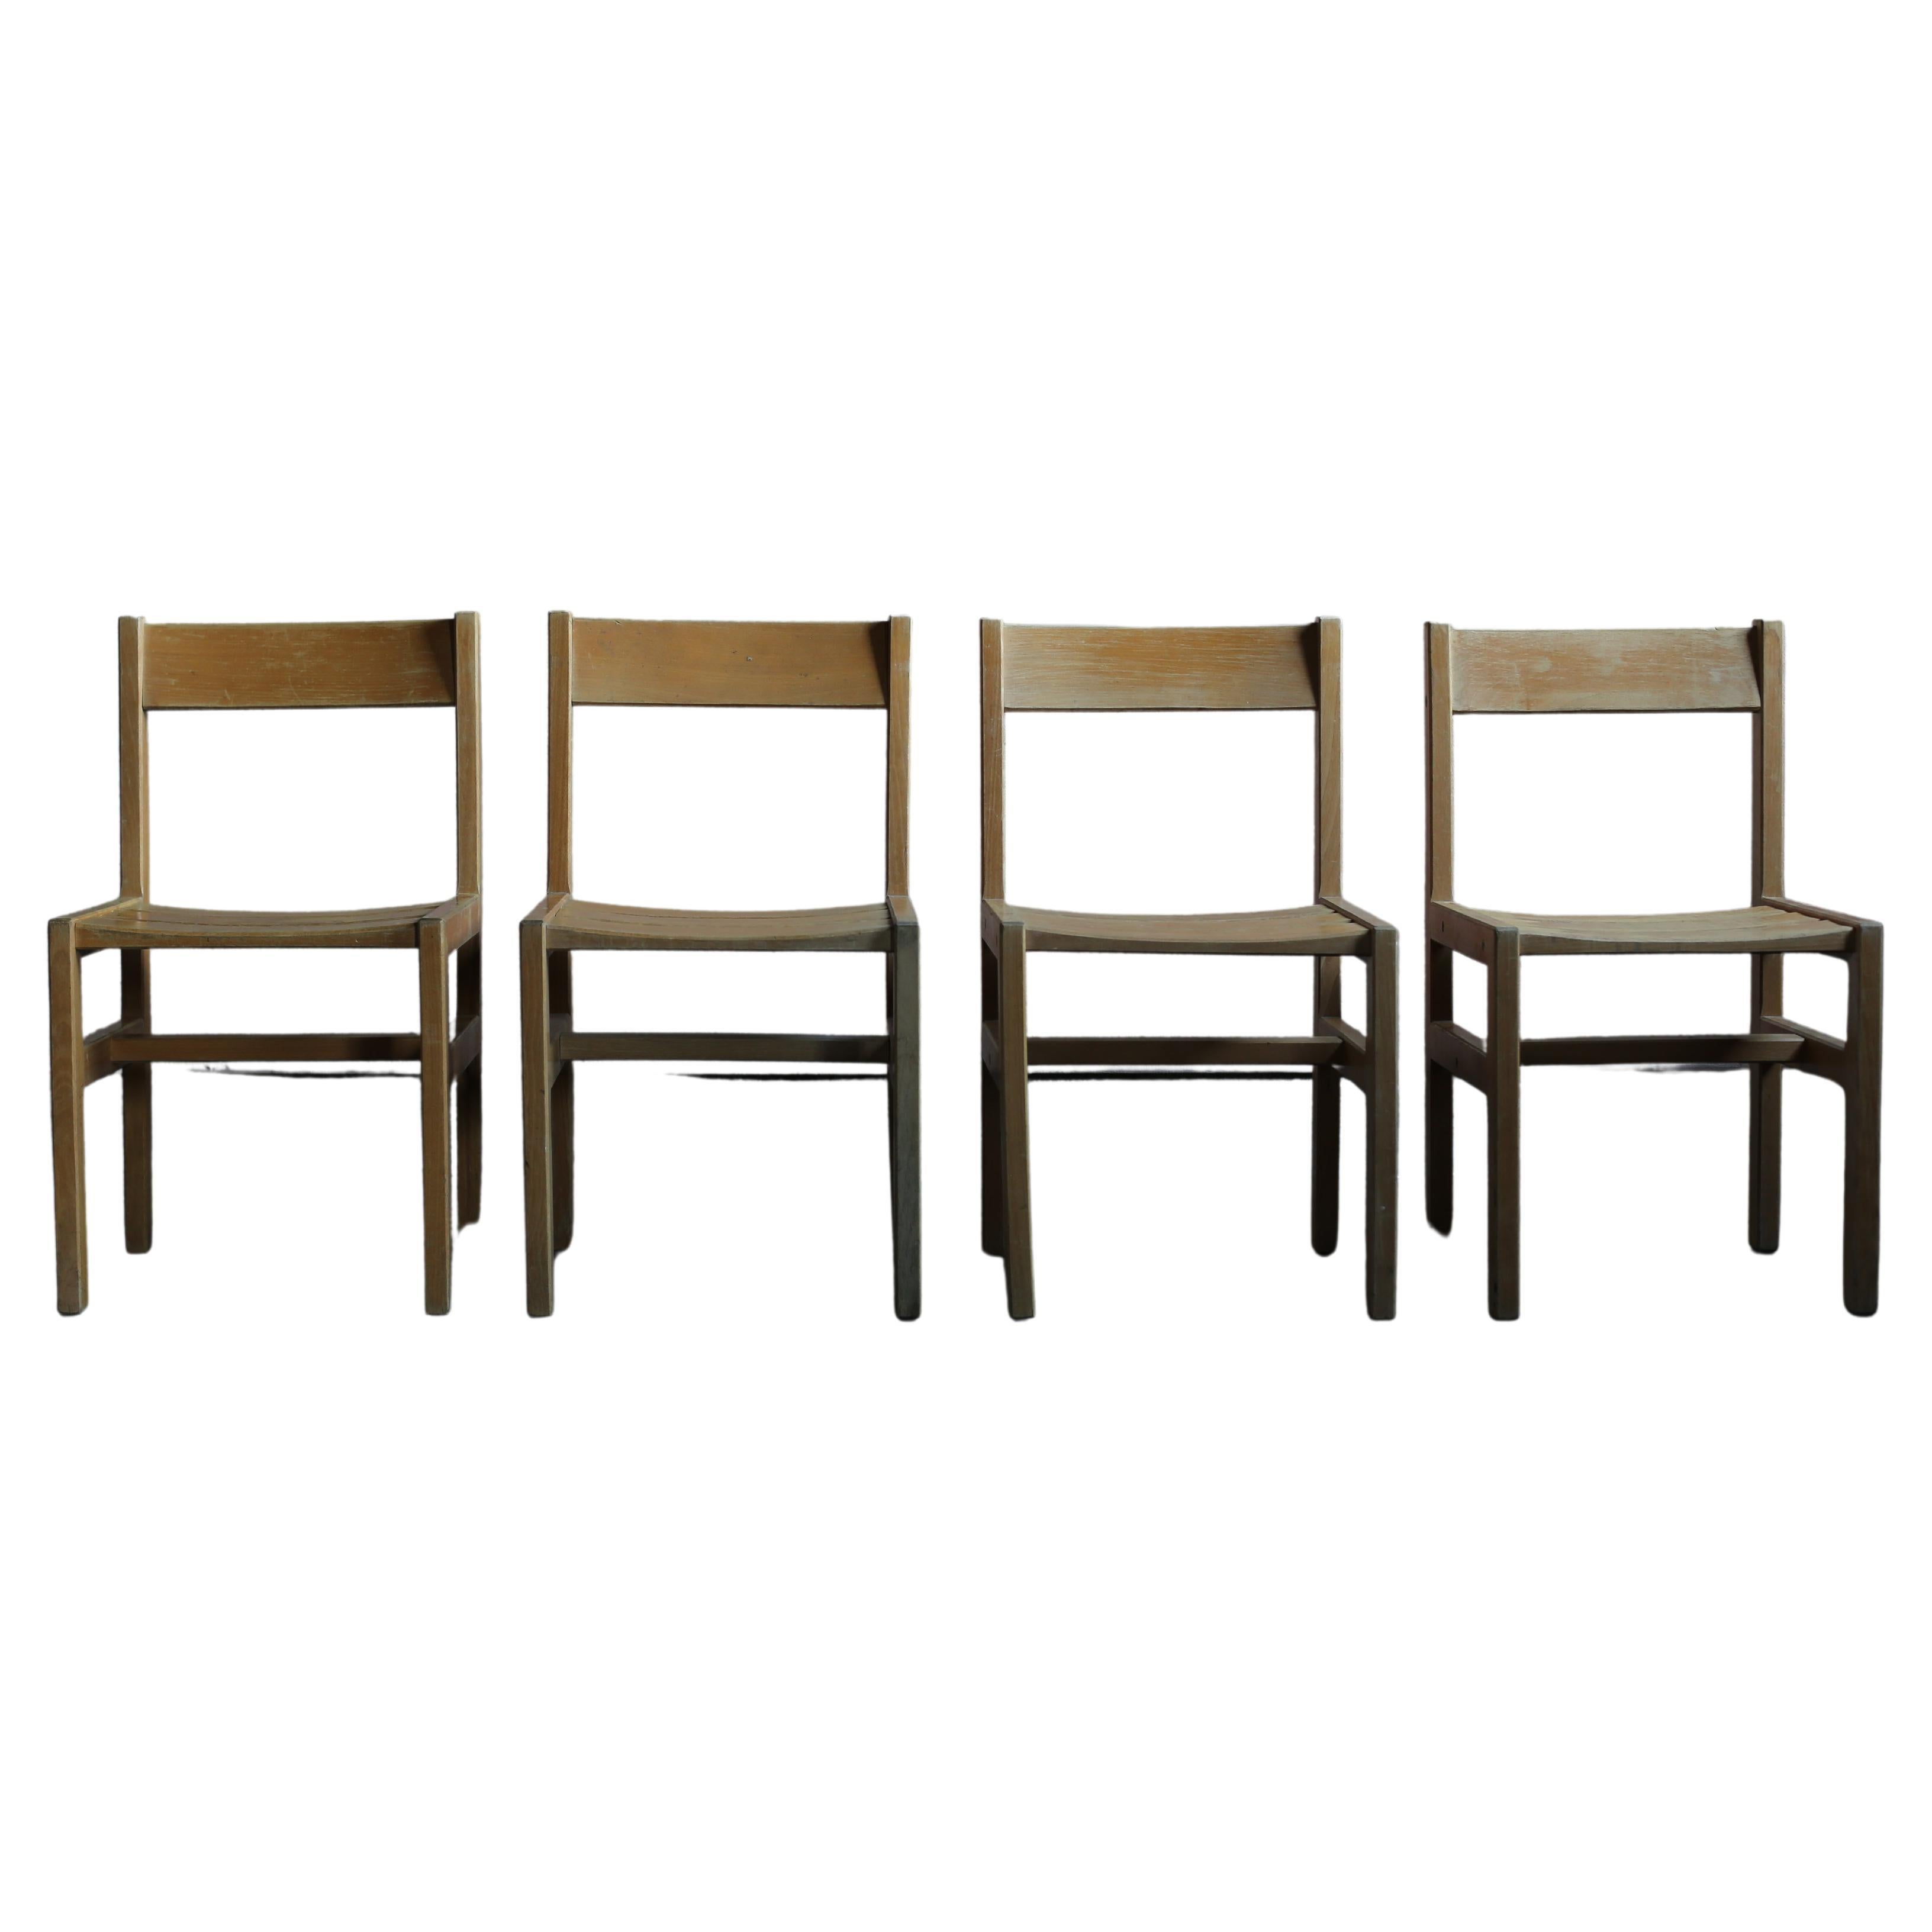 Beech chairs by André Sornay